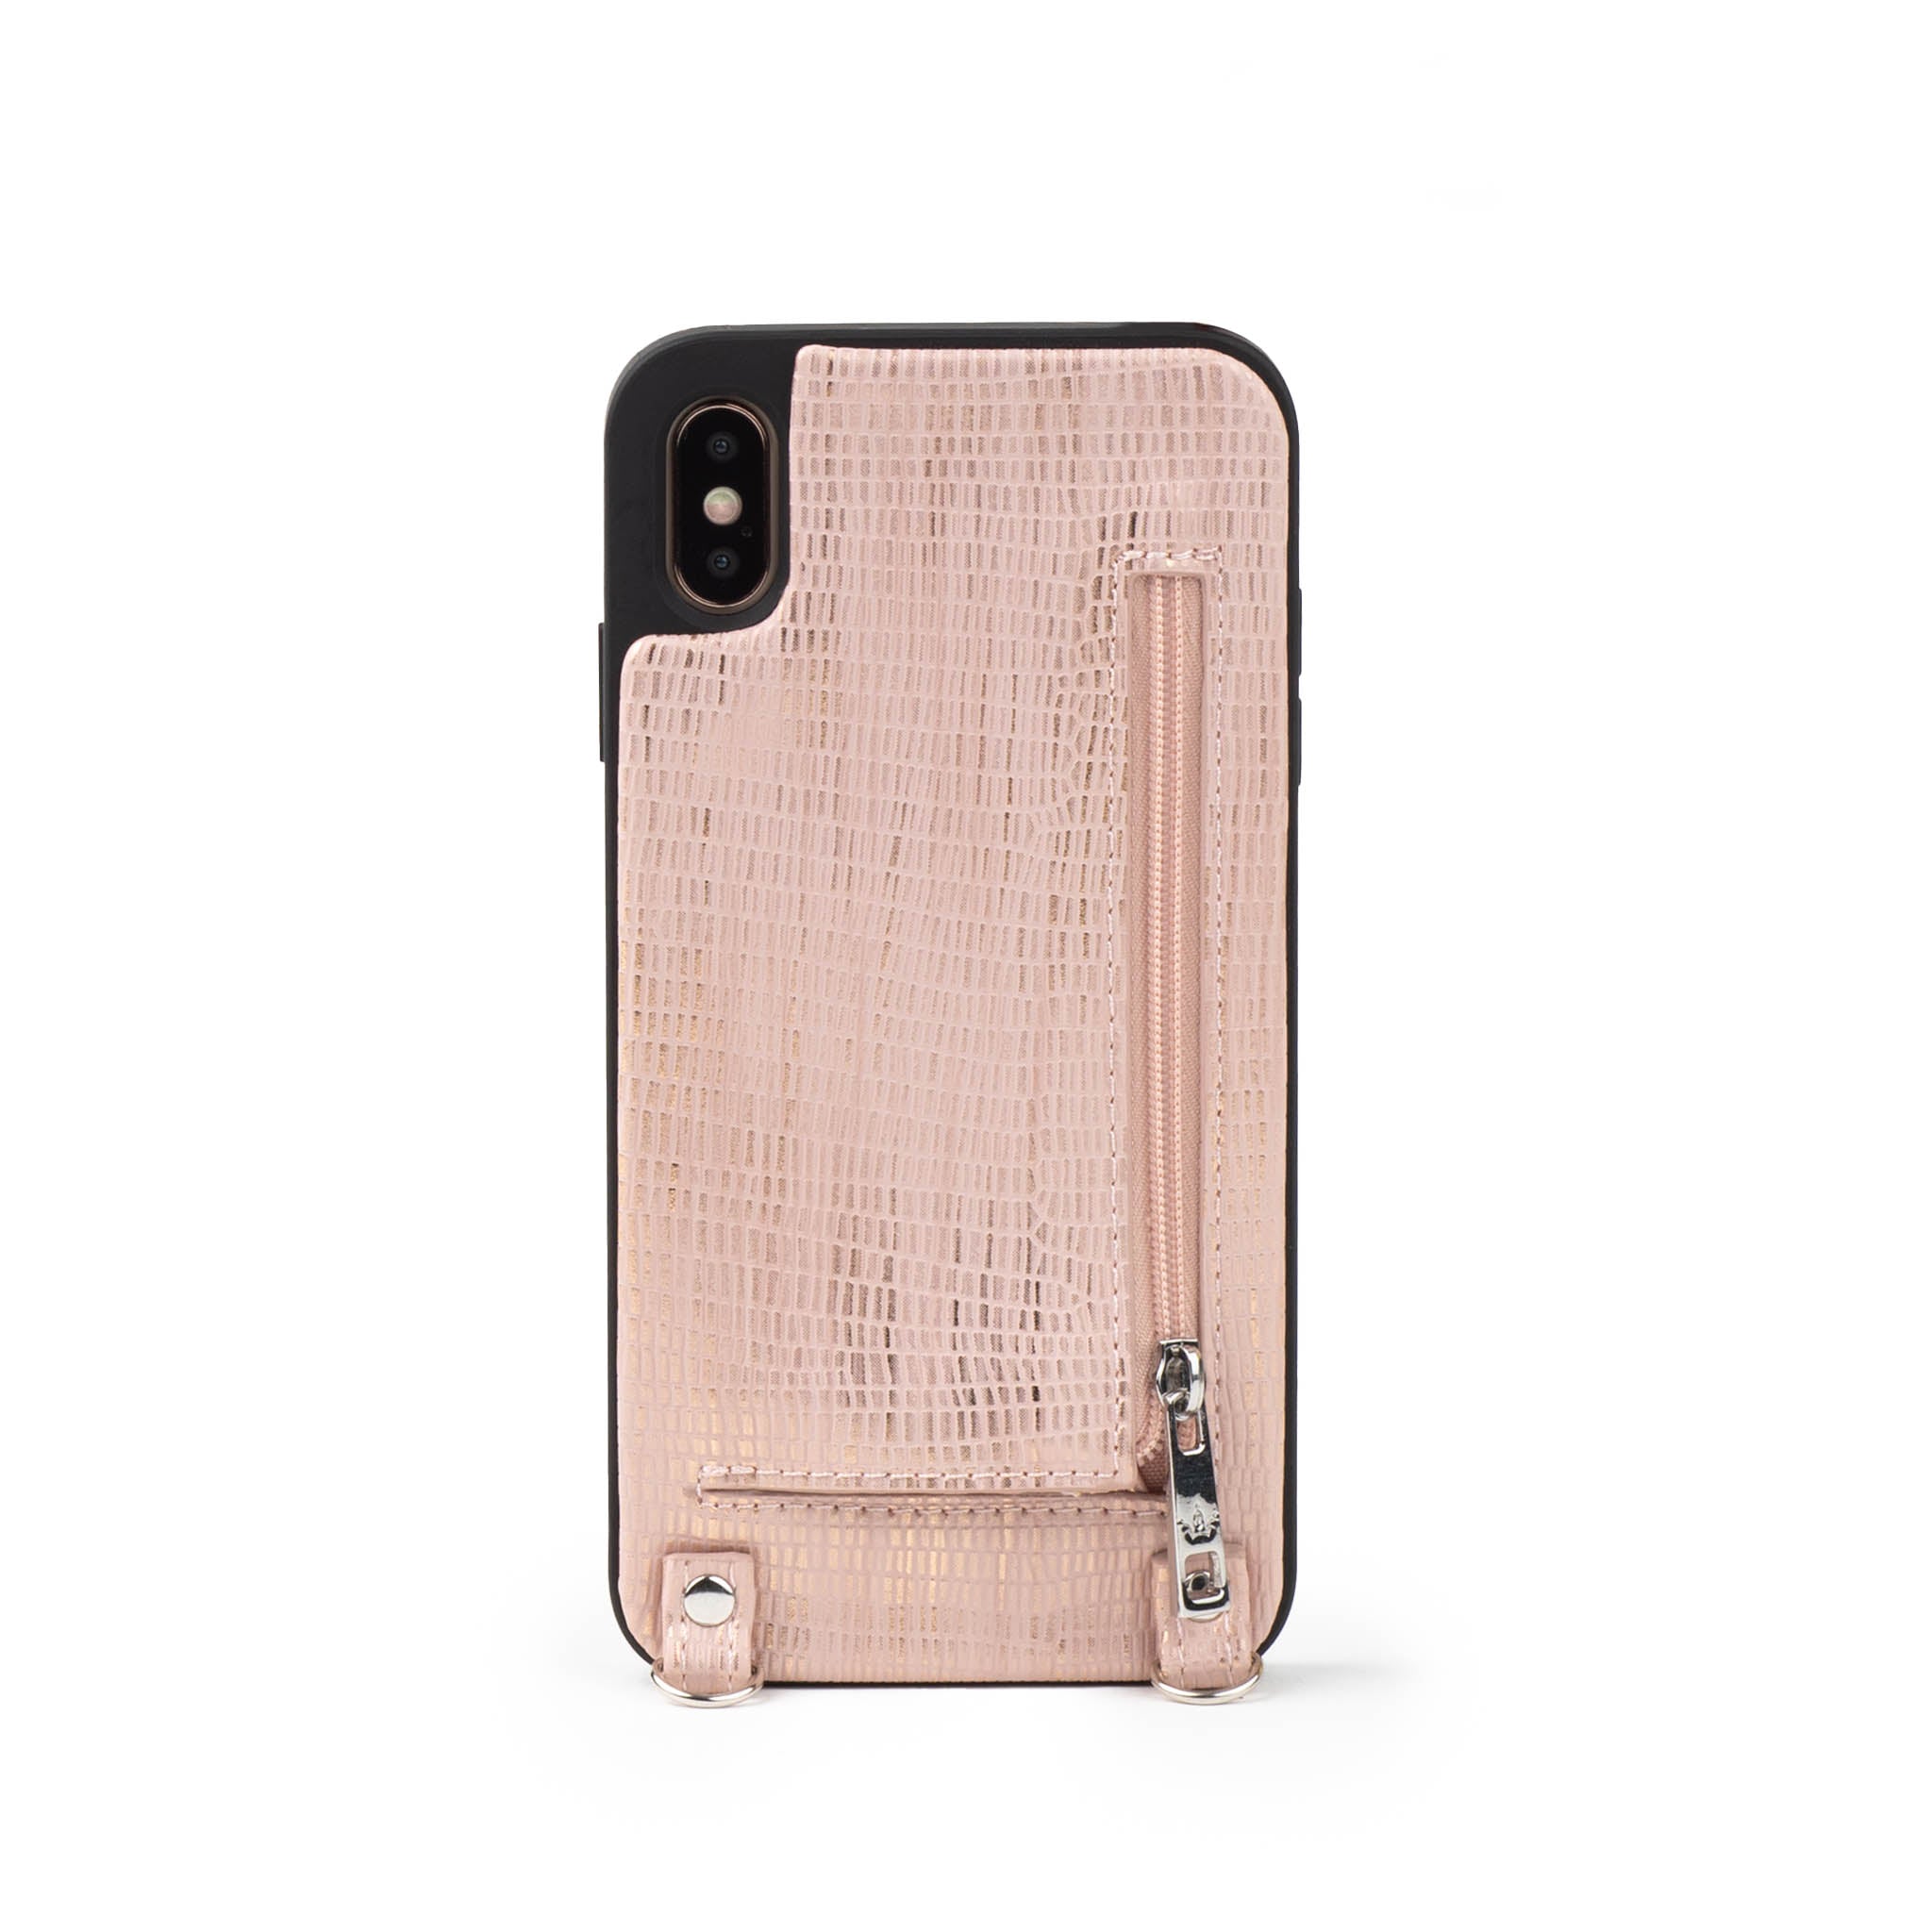 Scarlett iPhone Crossbody Case - Order For Your iPhone XS Max - Hera Cases